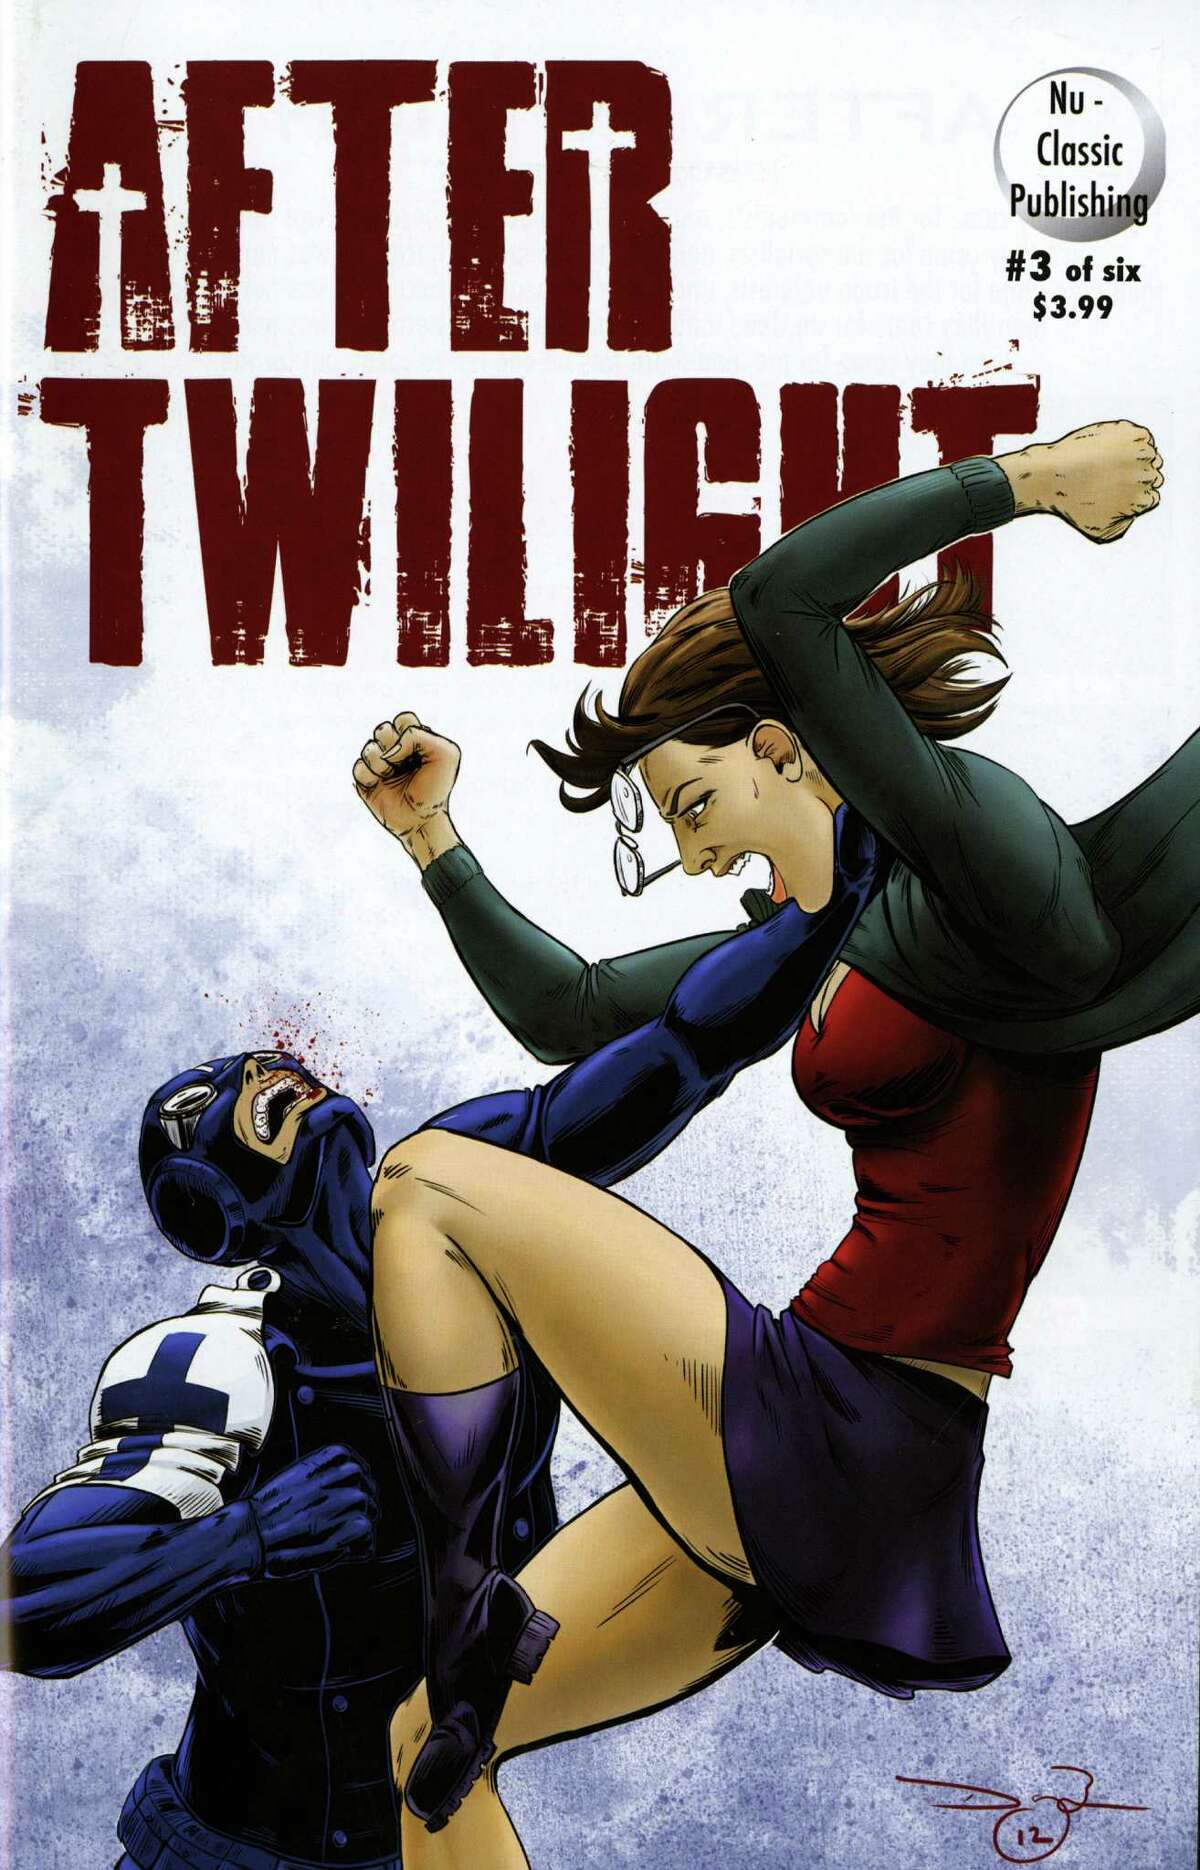 The "After Twilight" graphic novel series is published by Nu-Classic Publishing in Houston.